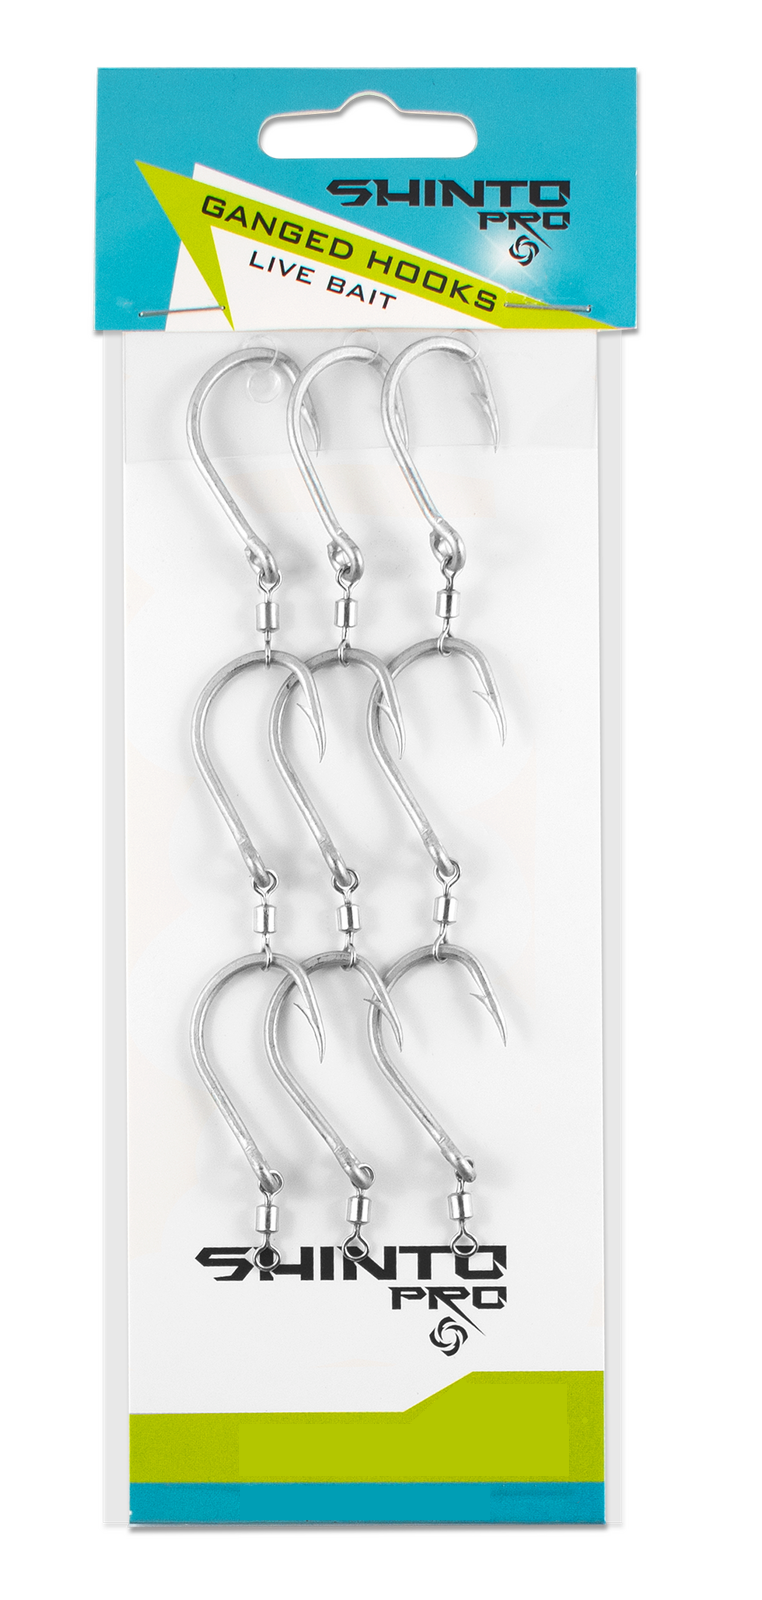 Shinto Pro Pre Ganged Live Bait Hook Sets With Swivels SH101